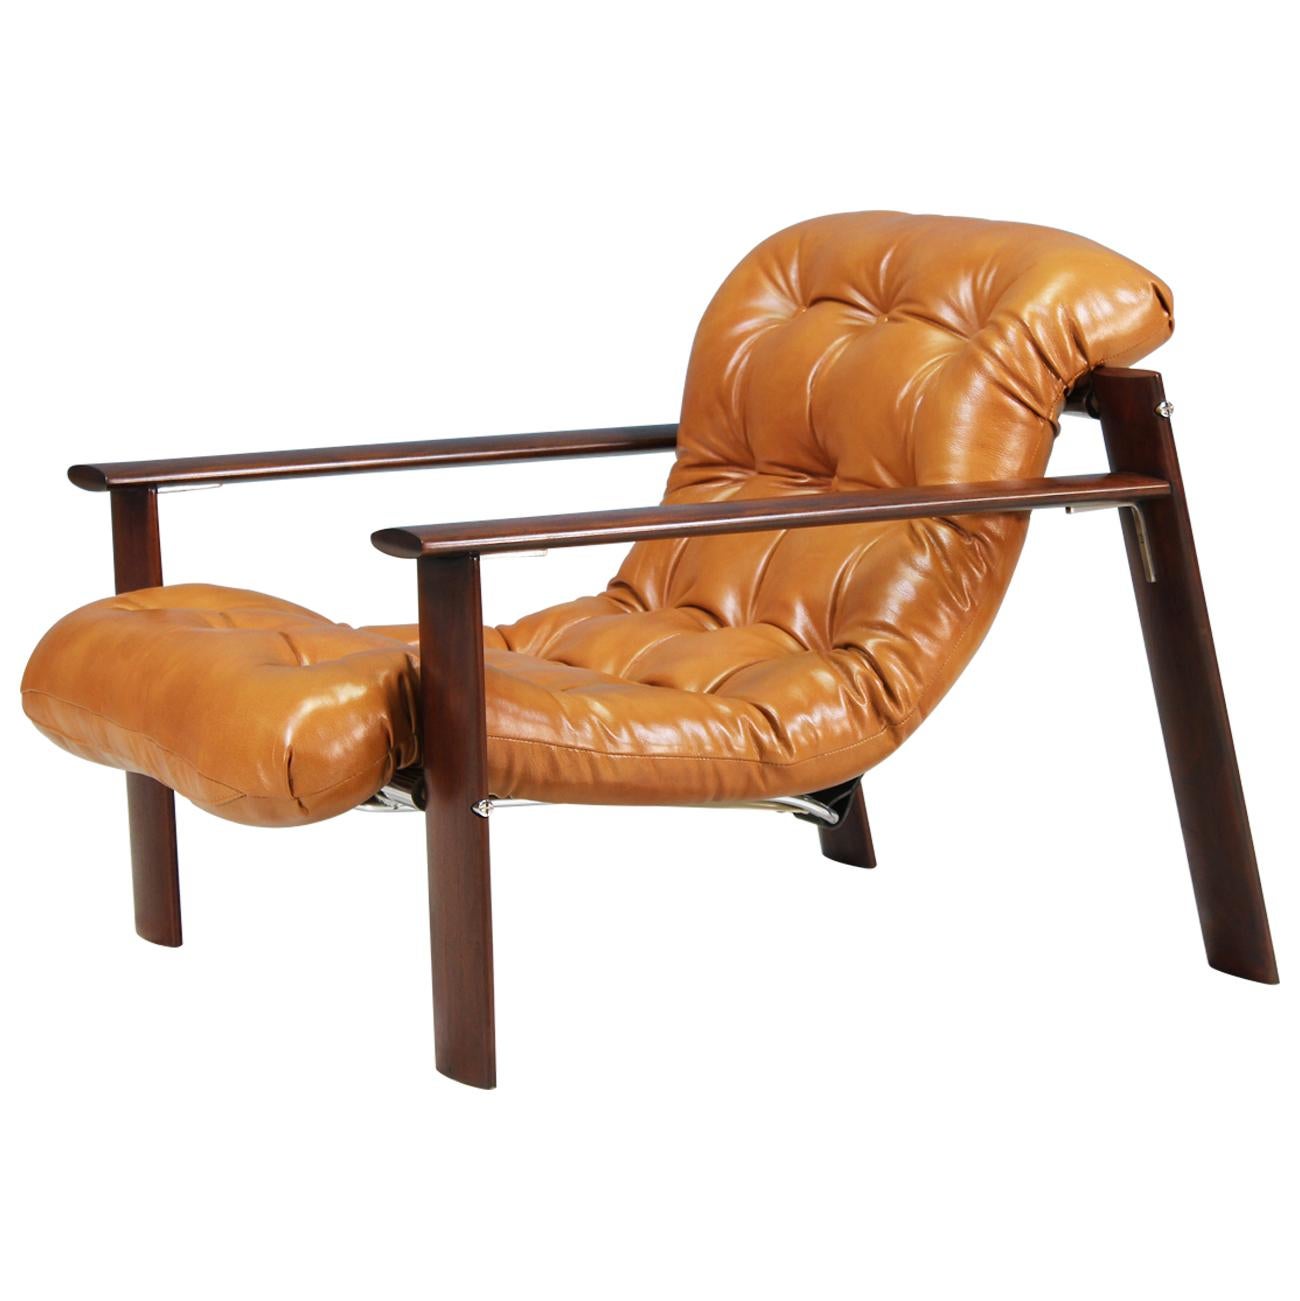 Brazilian Leather and Mahogany Mp-129 Lounge Chair by Percival Lafer